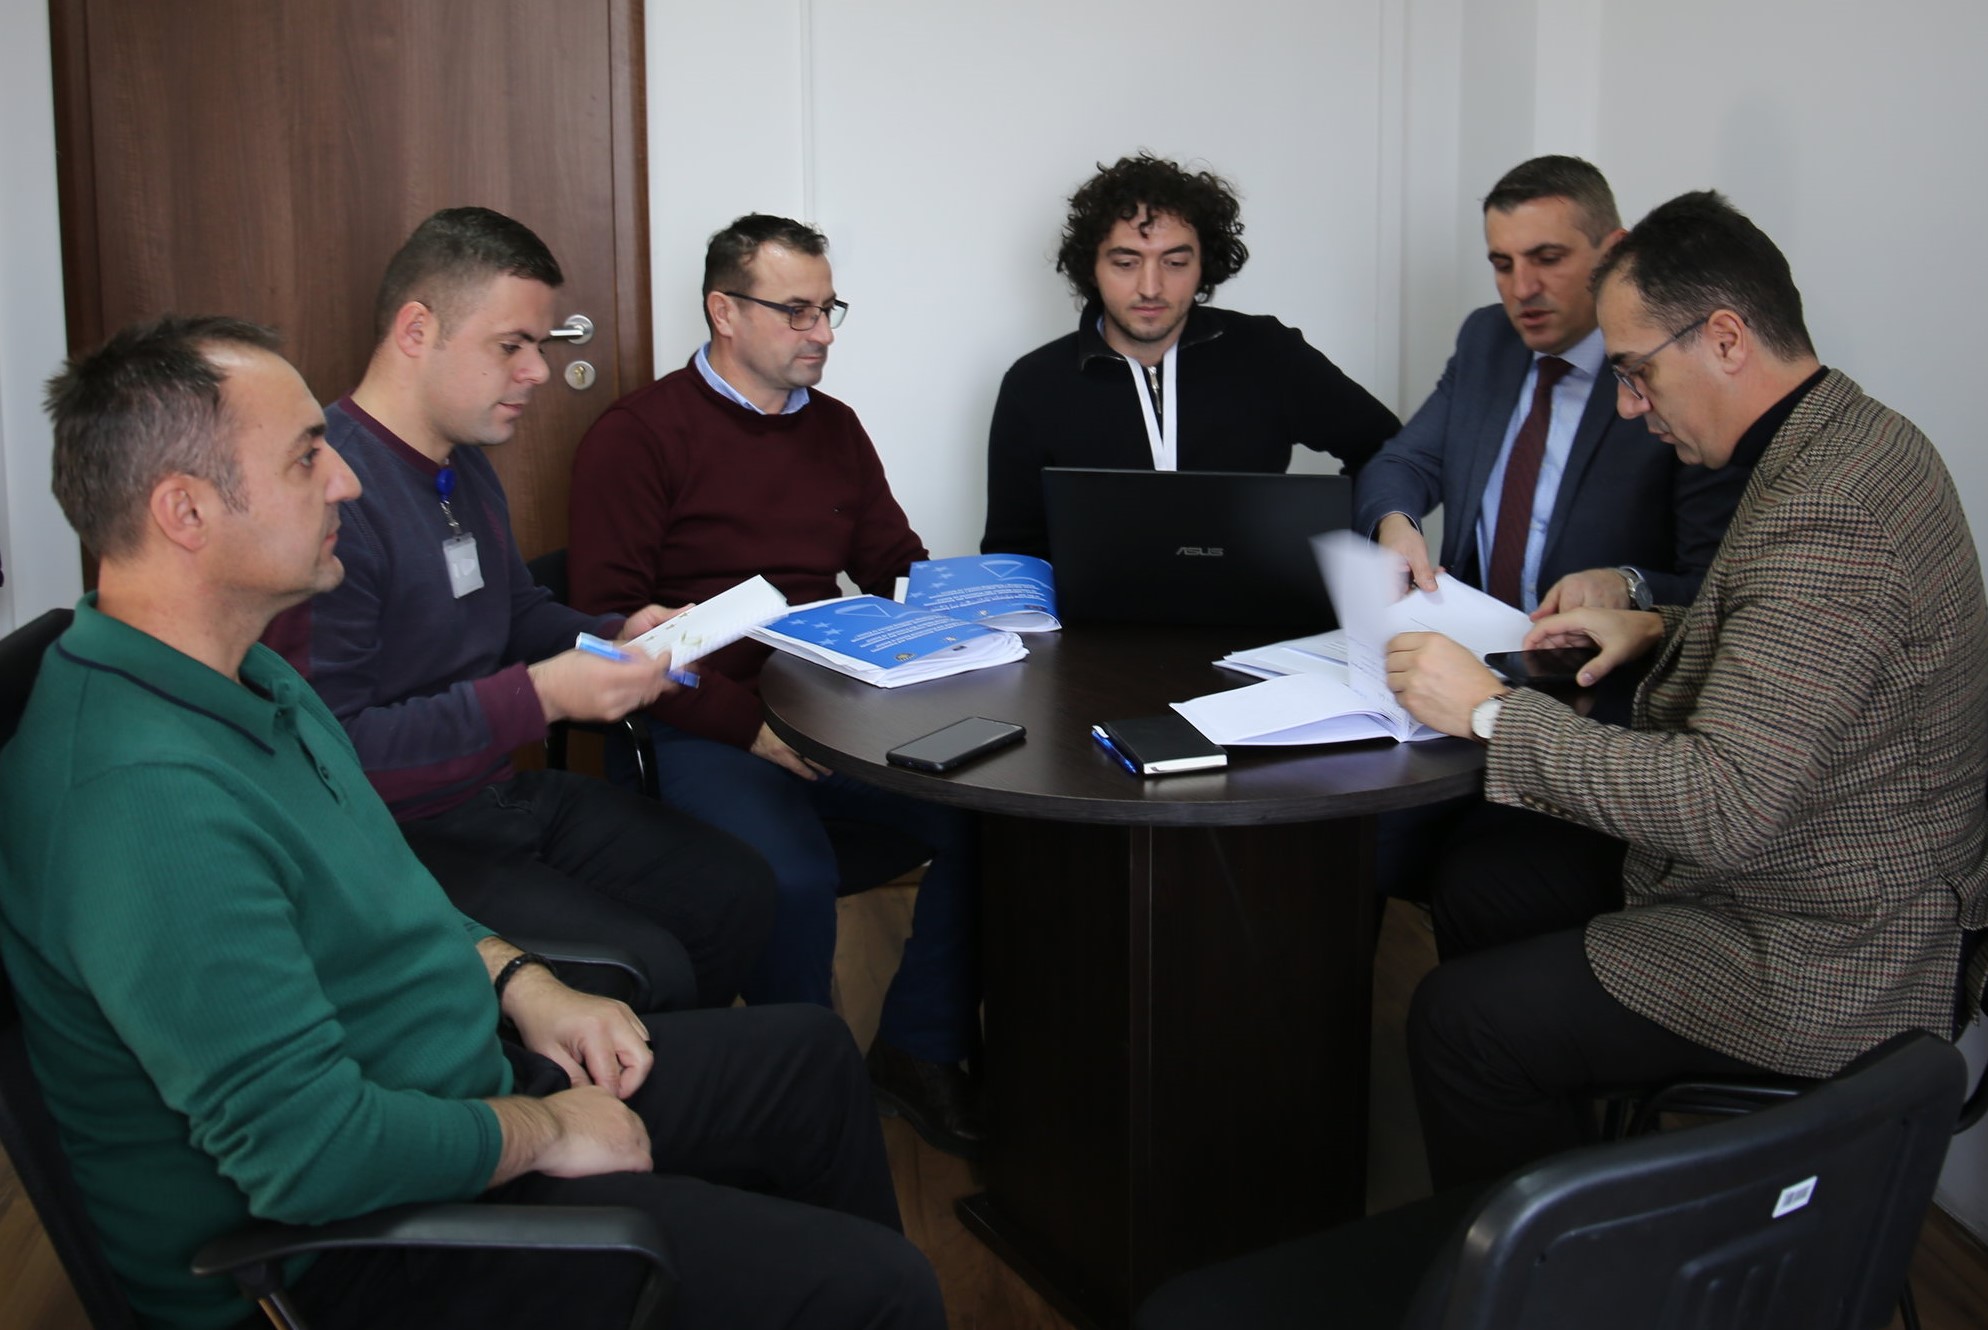 Work continues on drafting the regulation on the performance evaluation of prosecutors